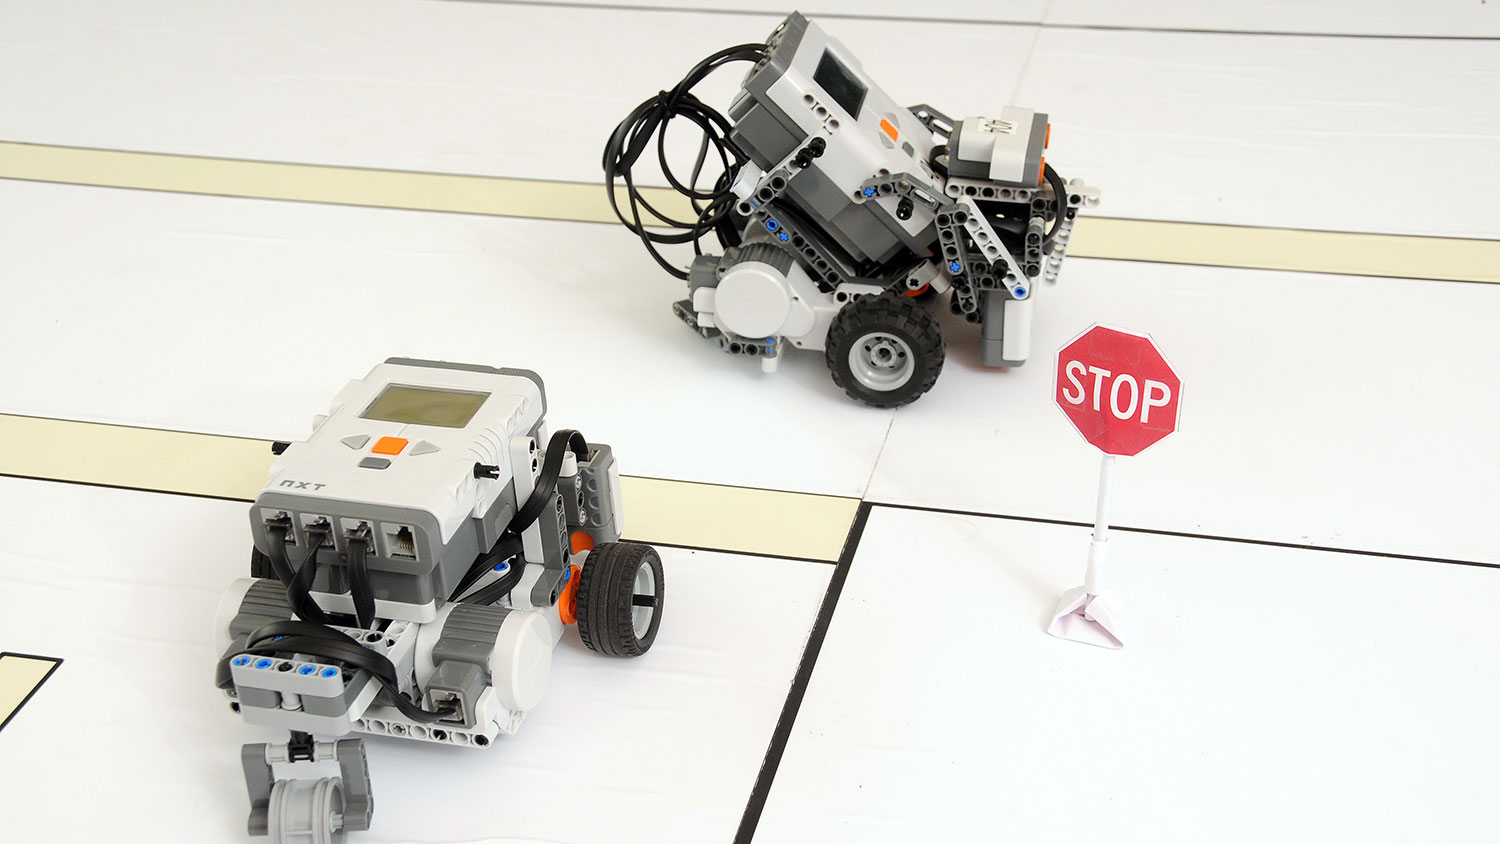 Dr. Mo-Yuen Chow's team's robot cars used to simulate driving in his EB2 lab. (Photo: Roger Winstead, 2010)